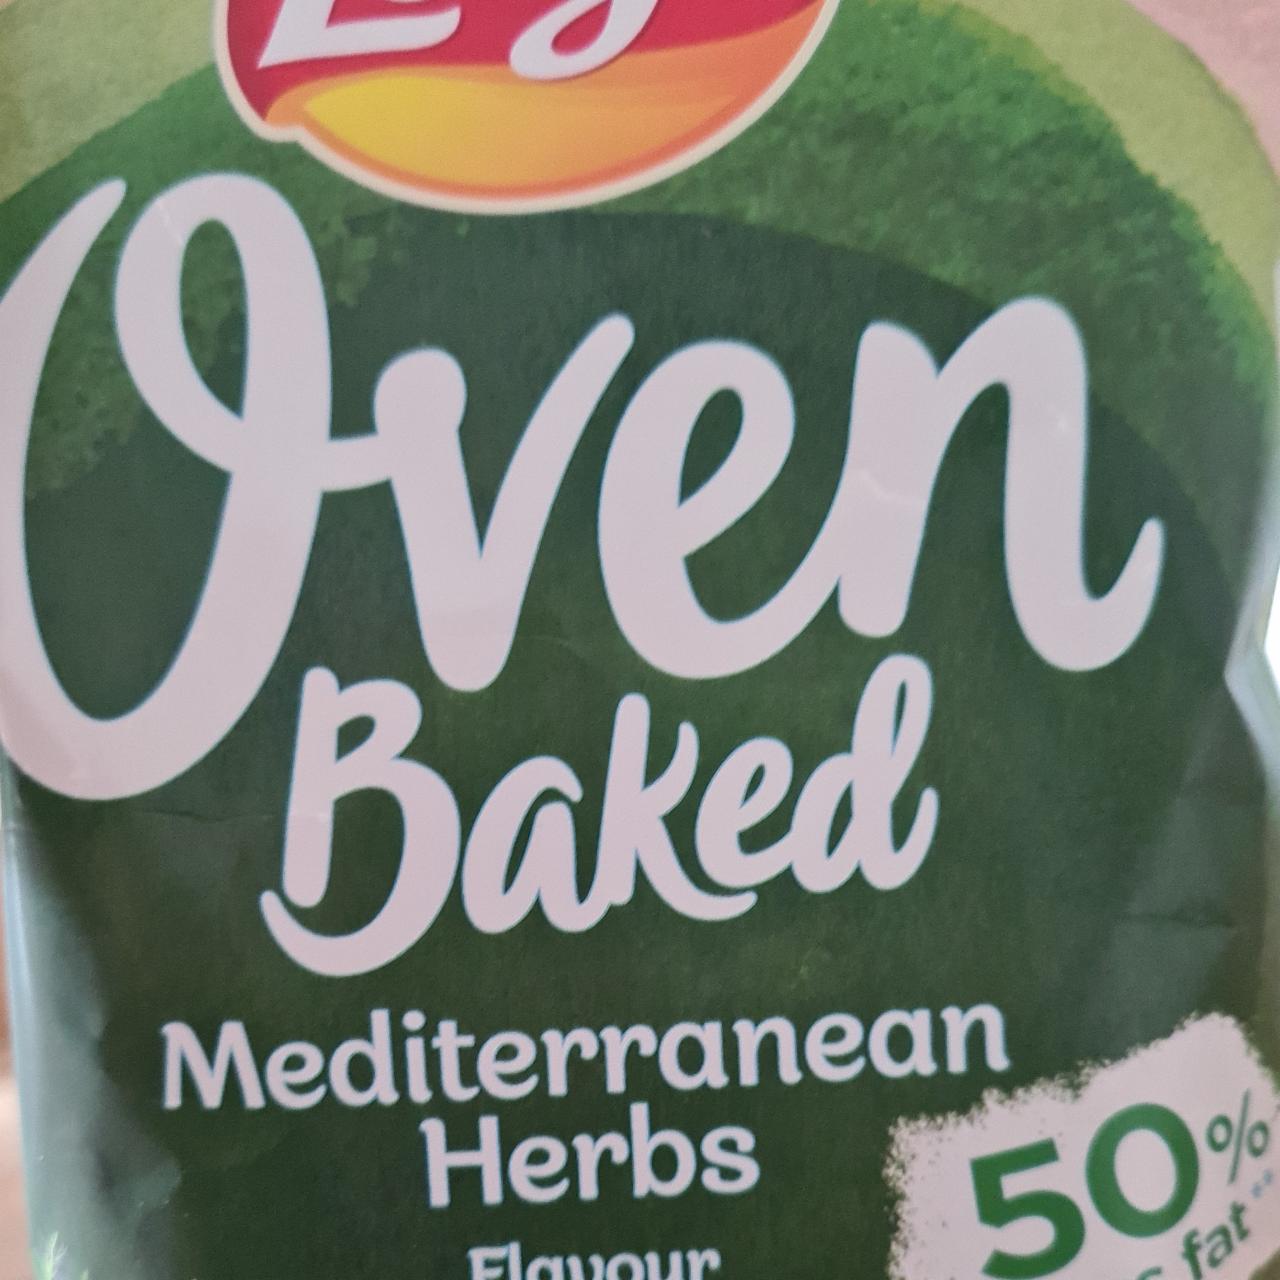 Fotografie - Oven Baked Mediterranean Herbs flavour 50% less fat Lay's